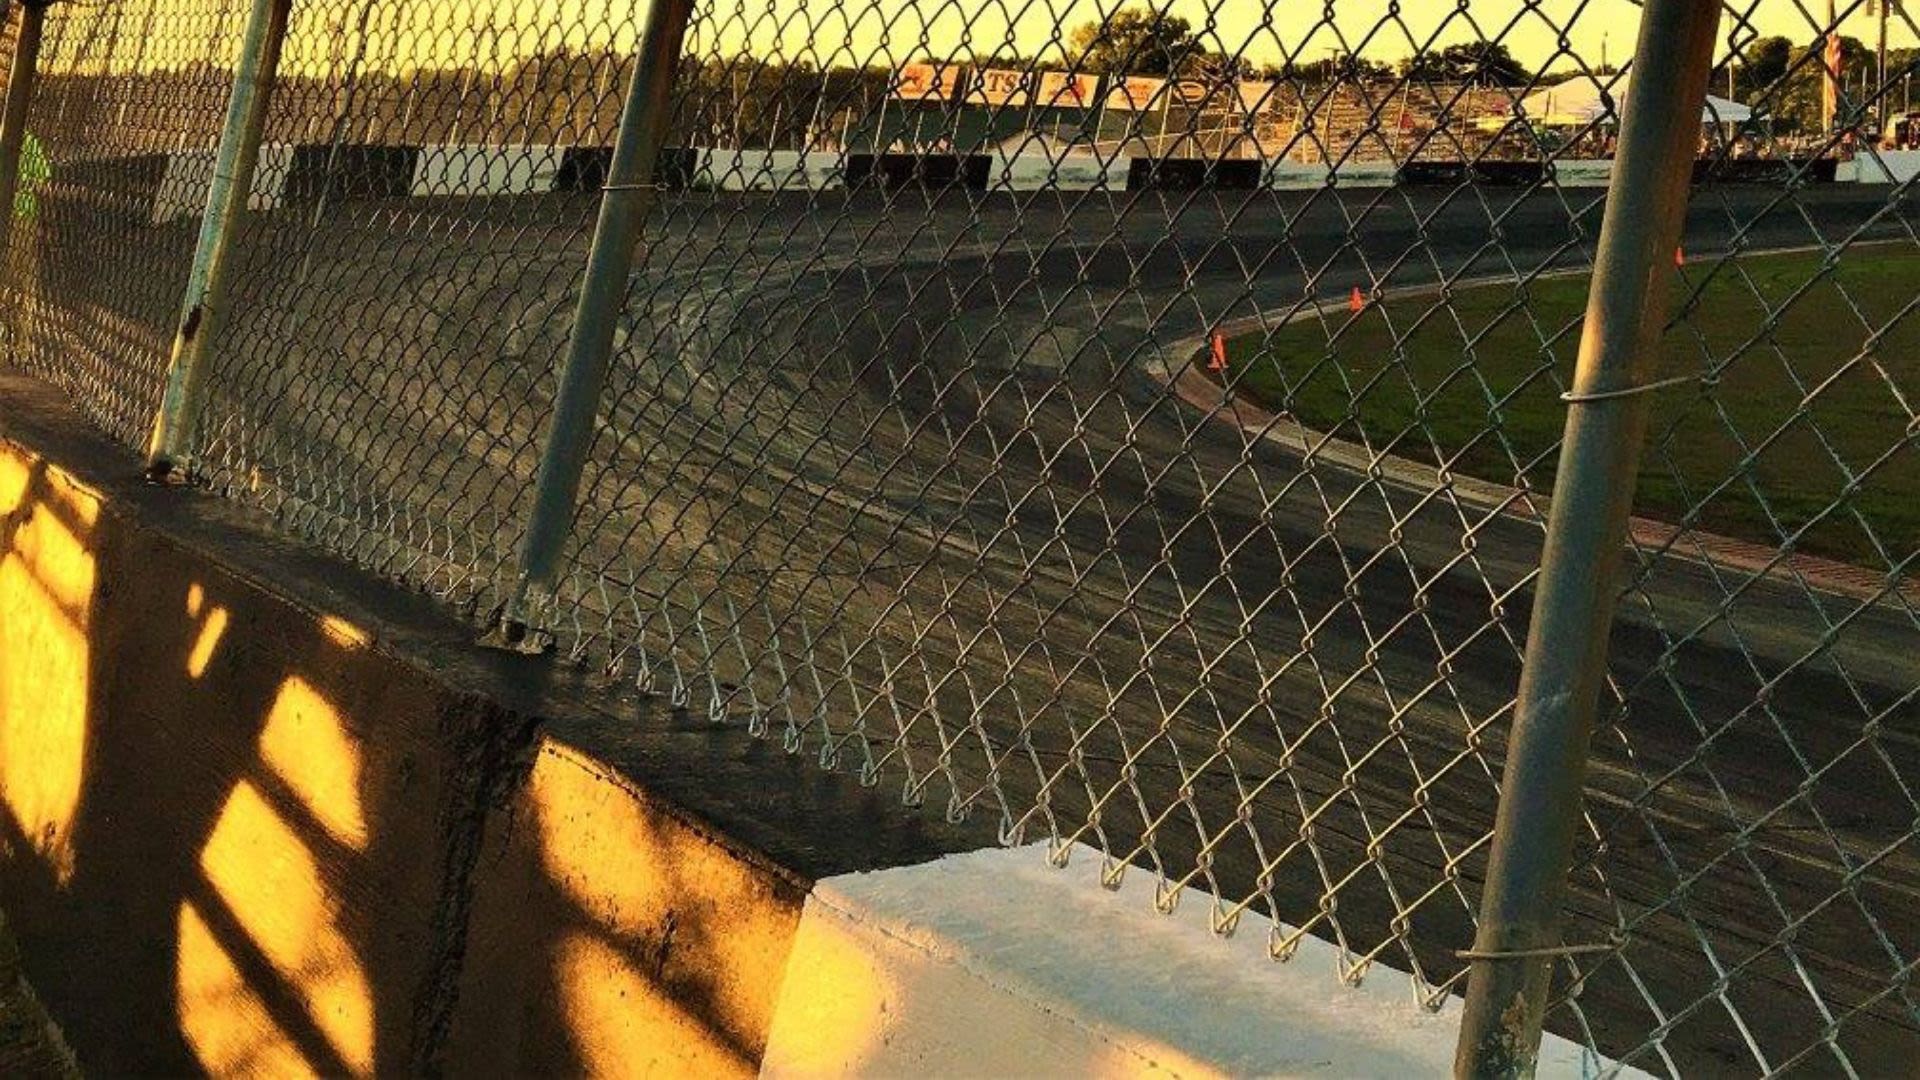 South Bend Motor Speedway holding 'Last Lap' race May 25